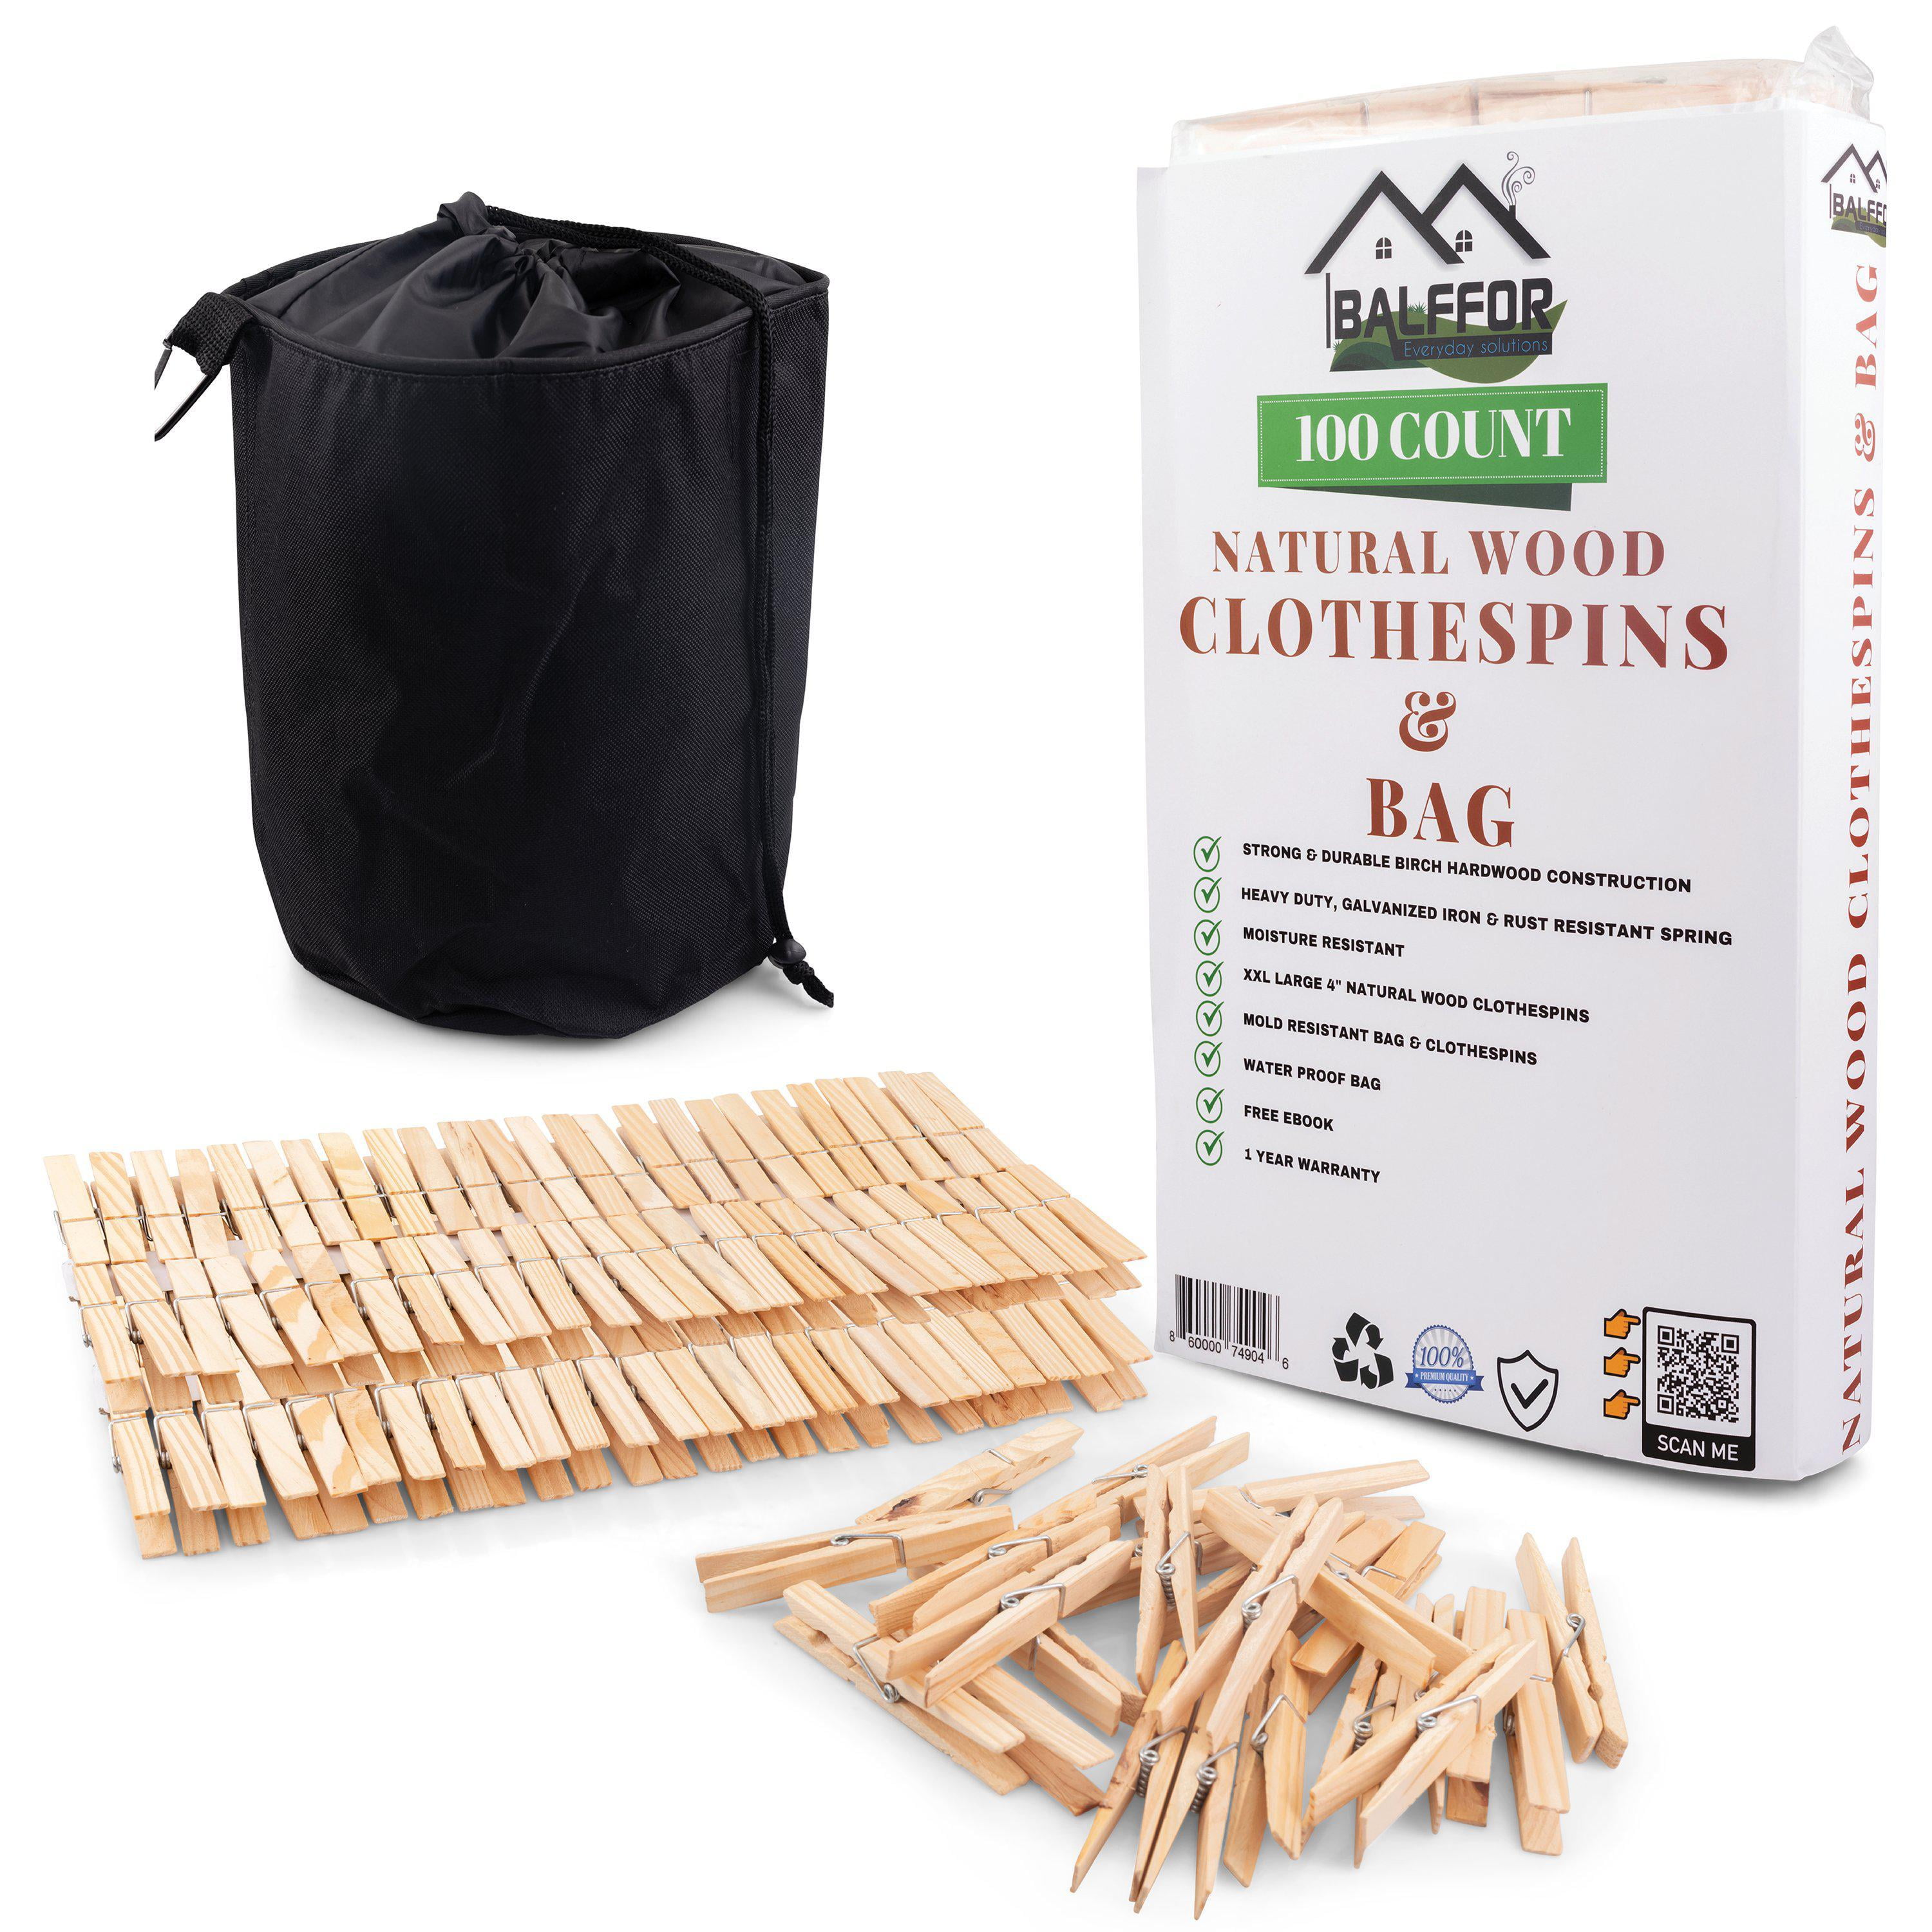 100 Large Wooden Clothes Laundry Pegs With Large Waterproof and Dust-Proof Clothes Pins Bag for Indoor or Outdoor Clothesline Balffor Natural Wood Clothespins & Clothespin Bag 